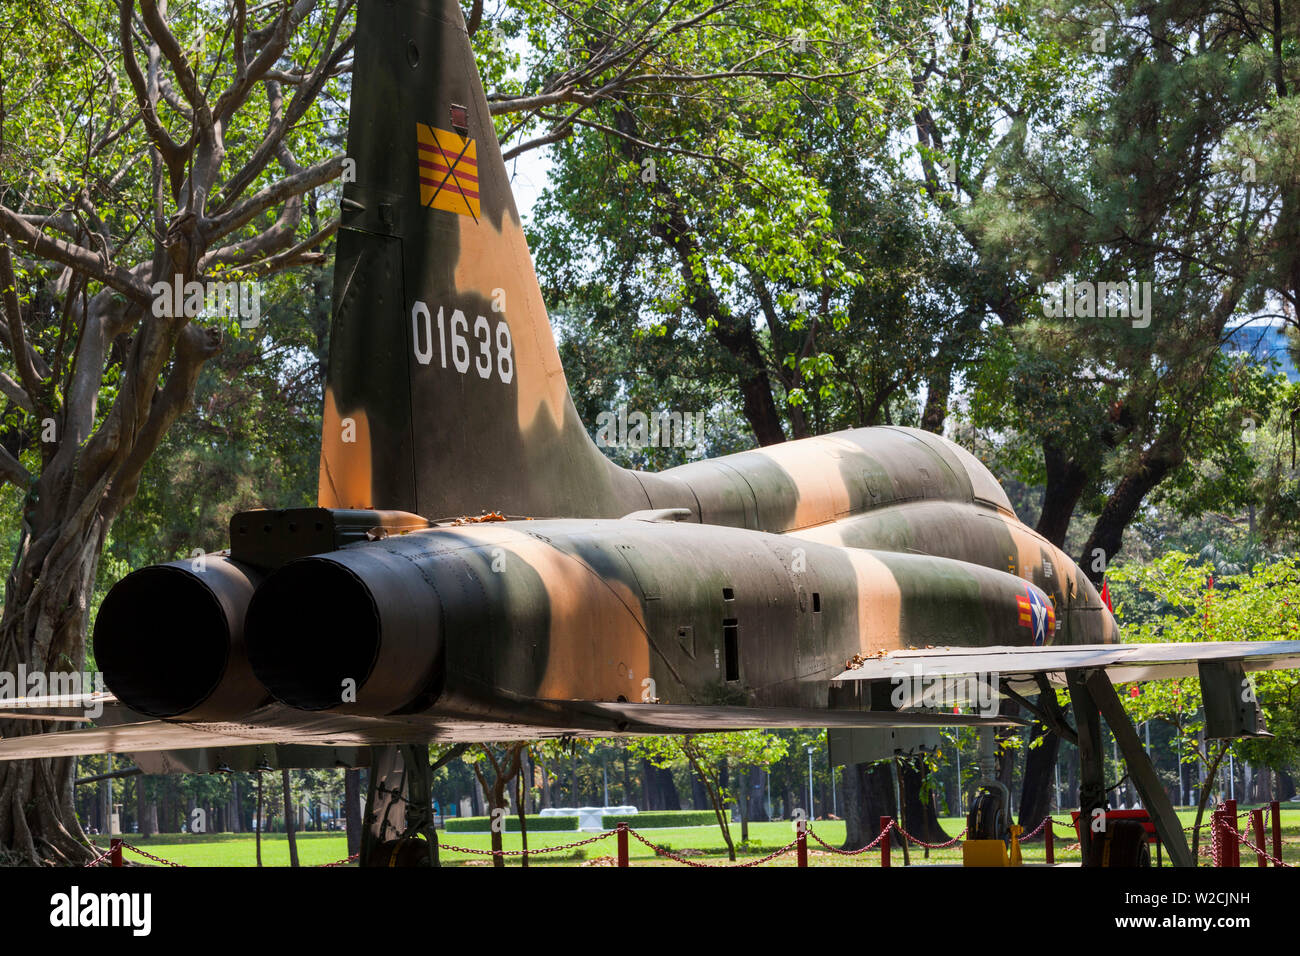 Vietnam, Ho Chi Minh City, Reunification Palace, former seat of South Vietnamese Government, Former South Vietnamese F-5E fighter plane used to bomb the palace at the end of the Vietnam War Stock Photo